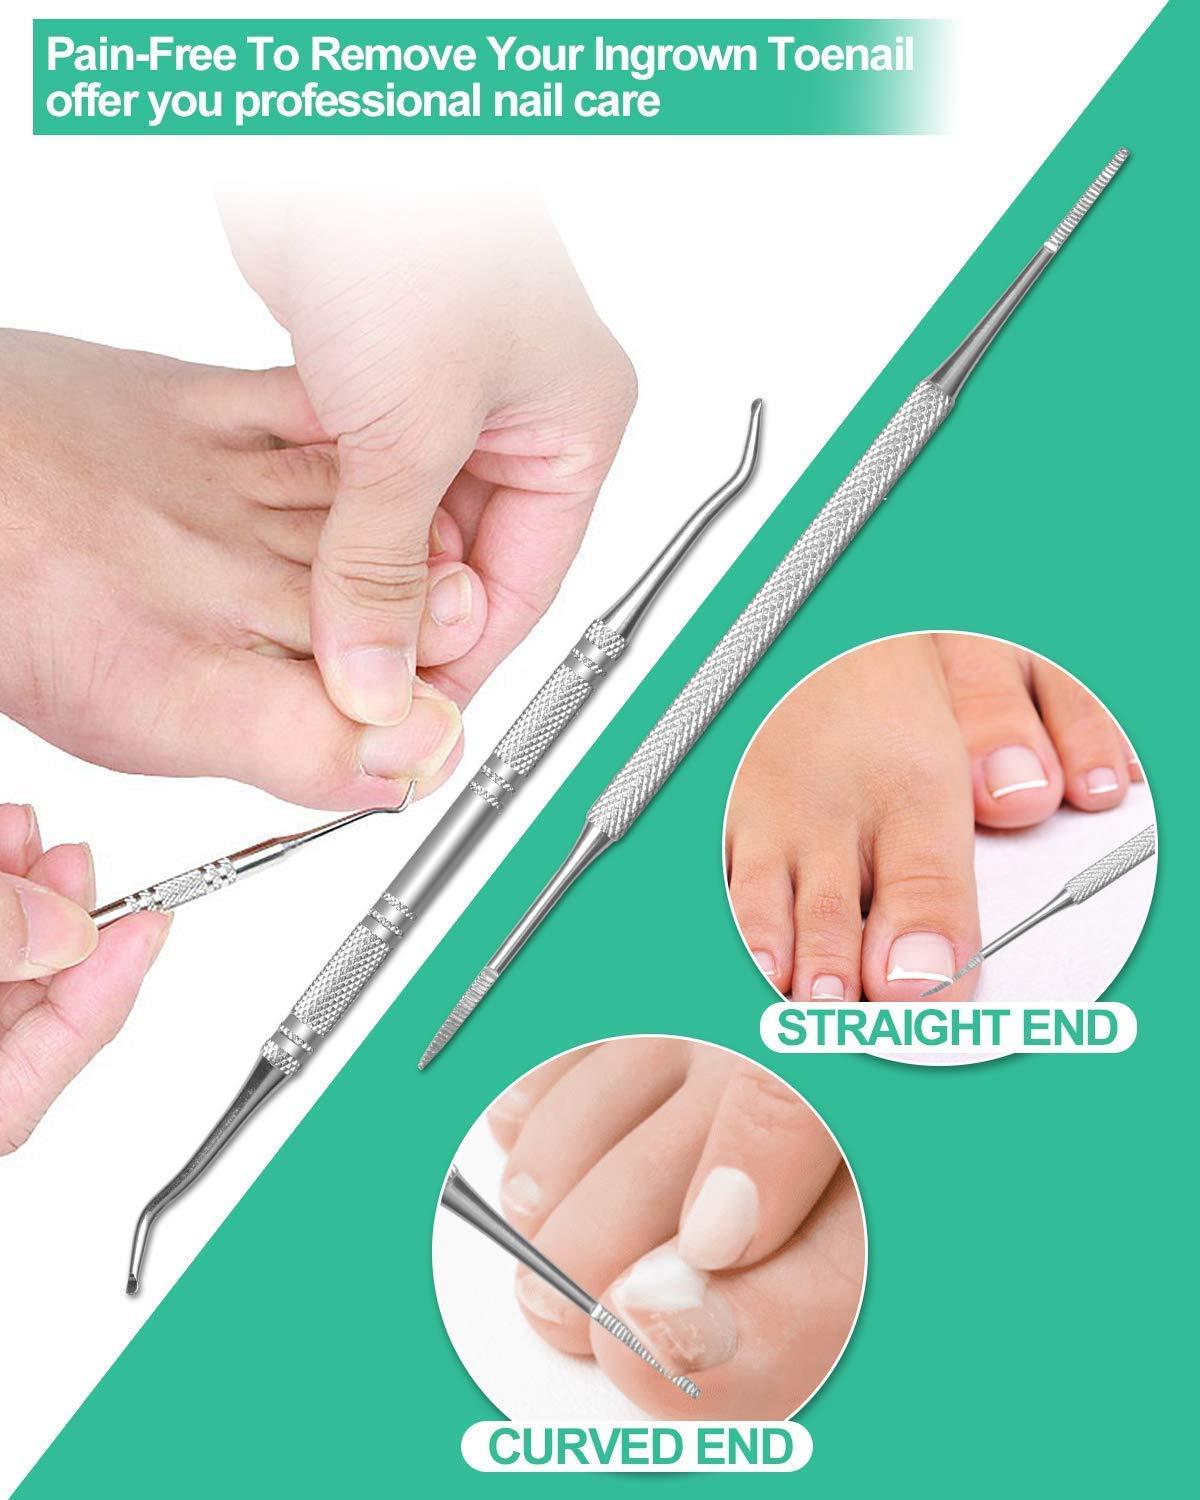 Extra Large Toe Nail Clippers for Thick Nails or Ingrown Toenails